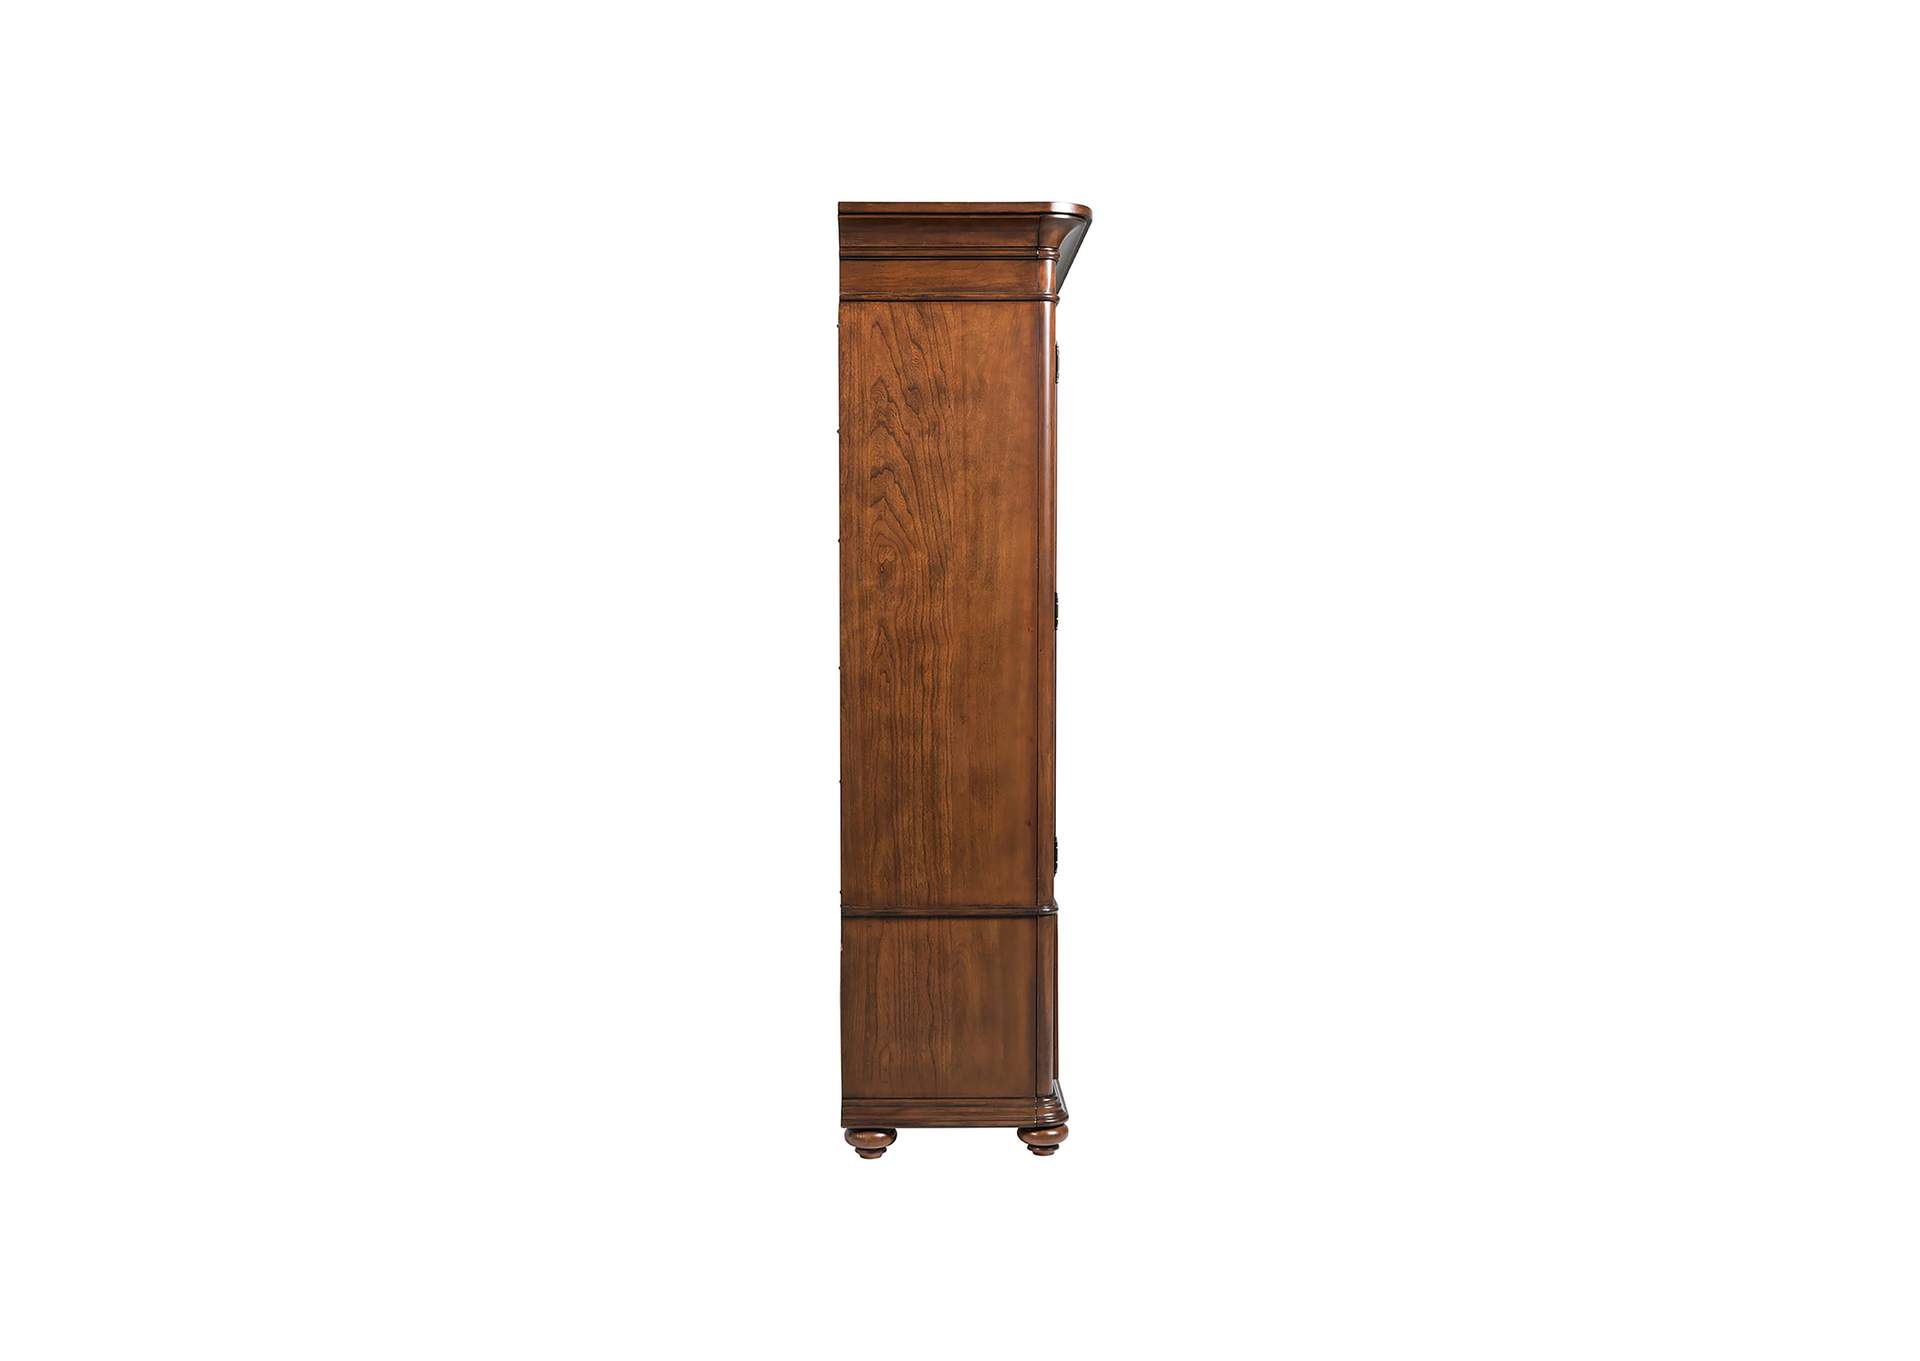 Clinton Hill Classic Cherry Display Cabinet,Riverside